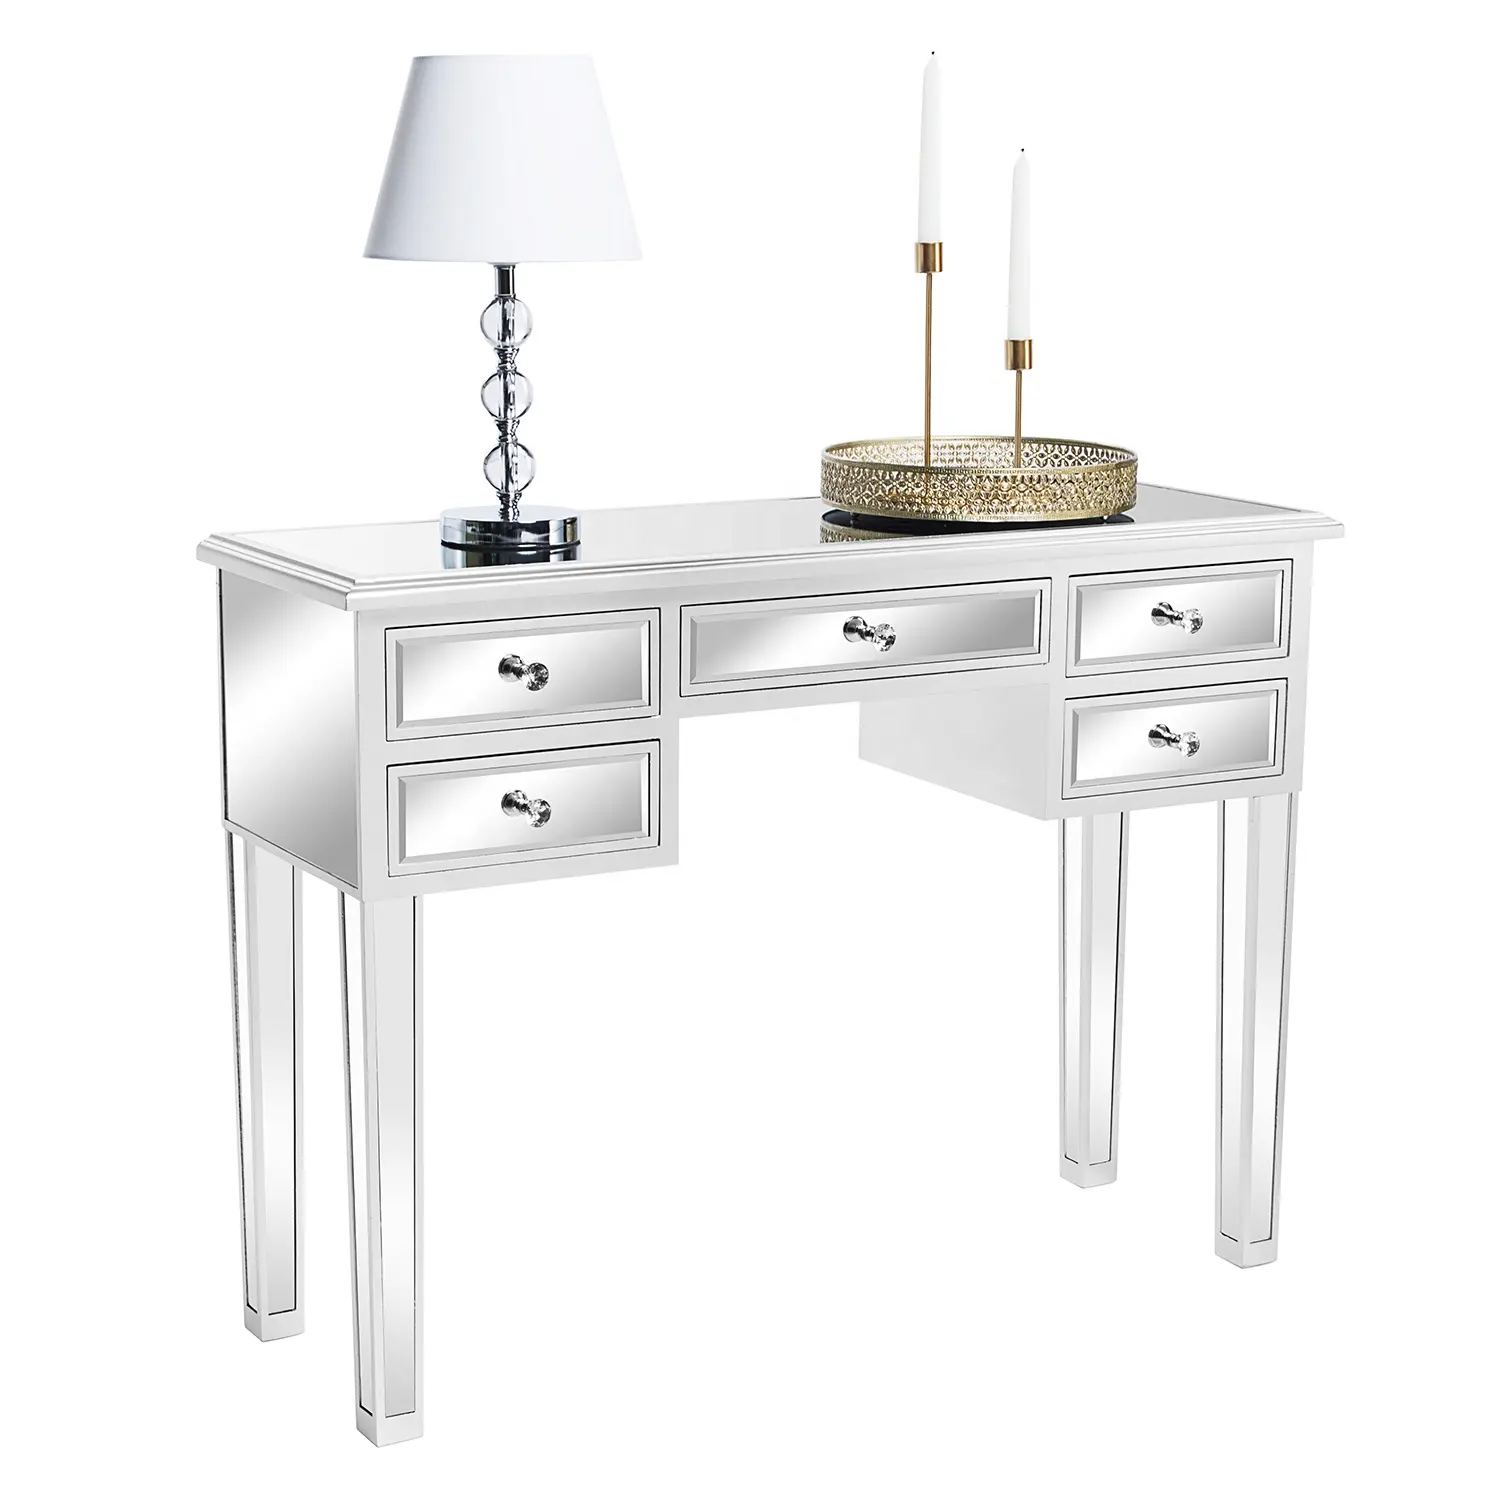 Modern 5 Drawer Mirrored Dresser Silver Console Table Mirrored Vanity Desk for Makeup